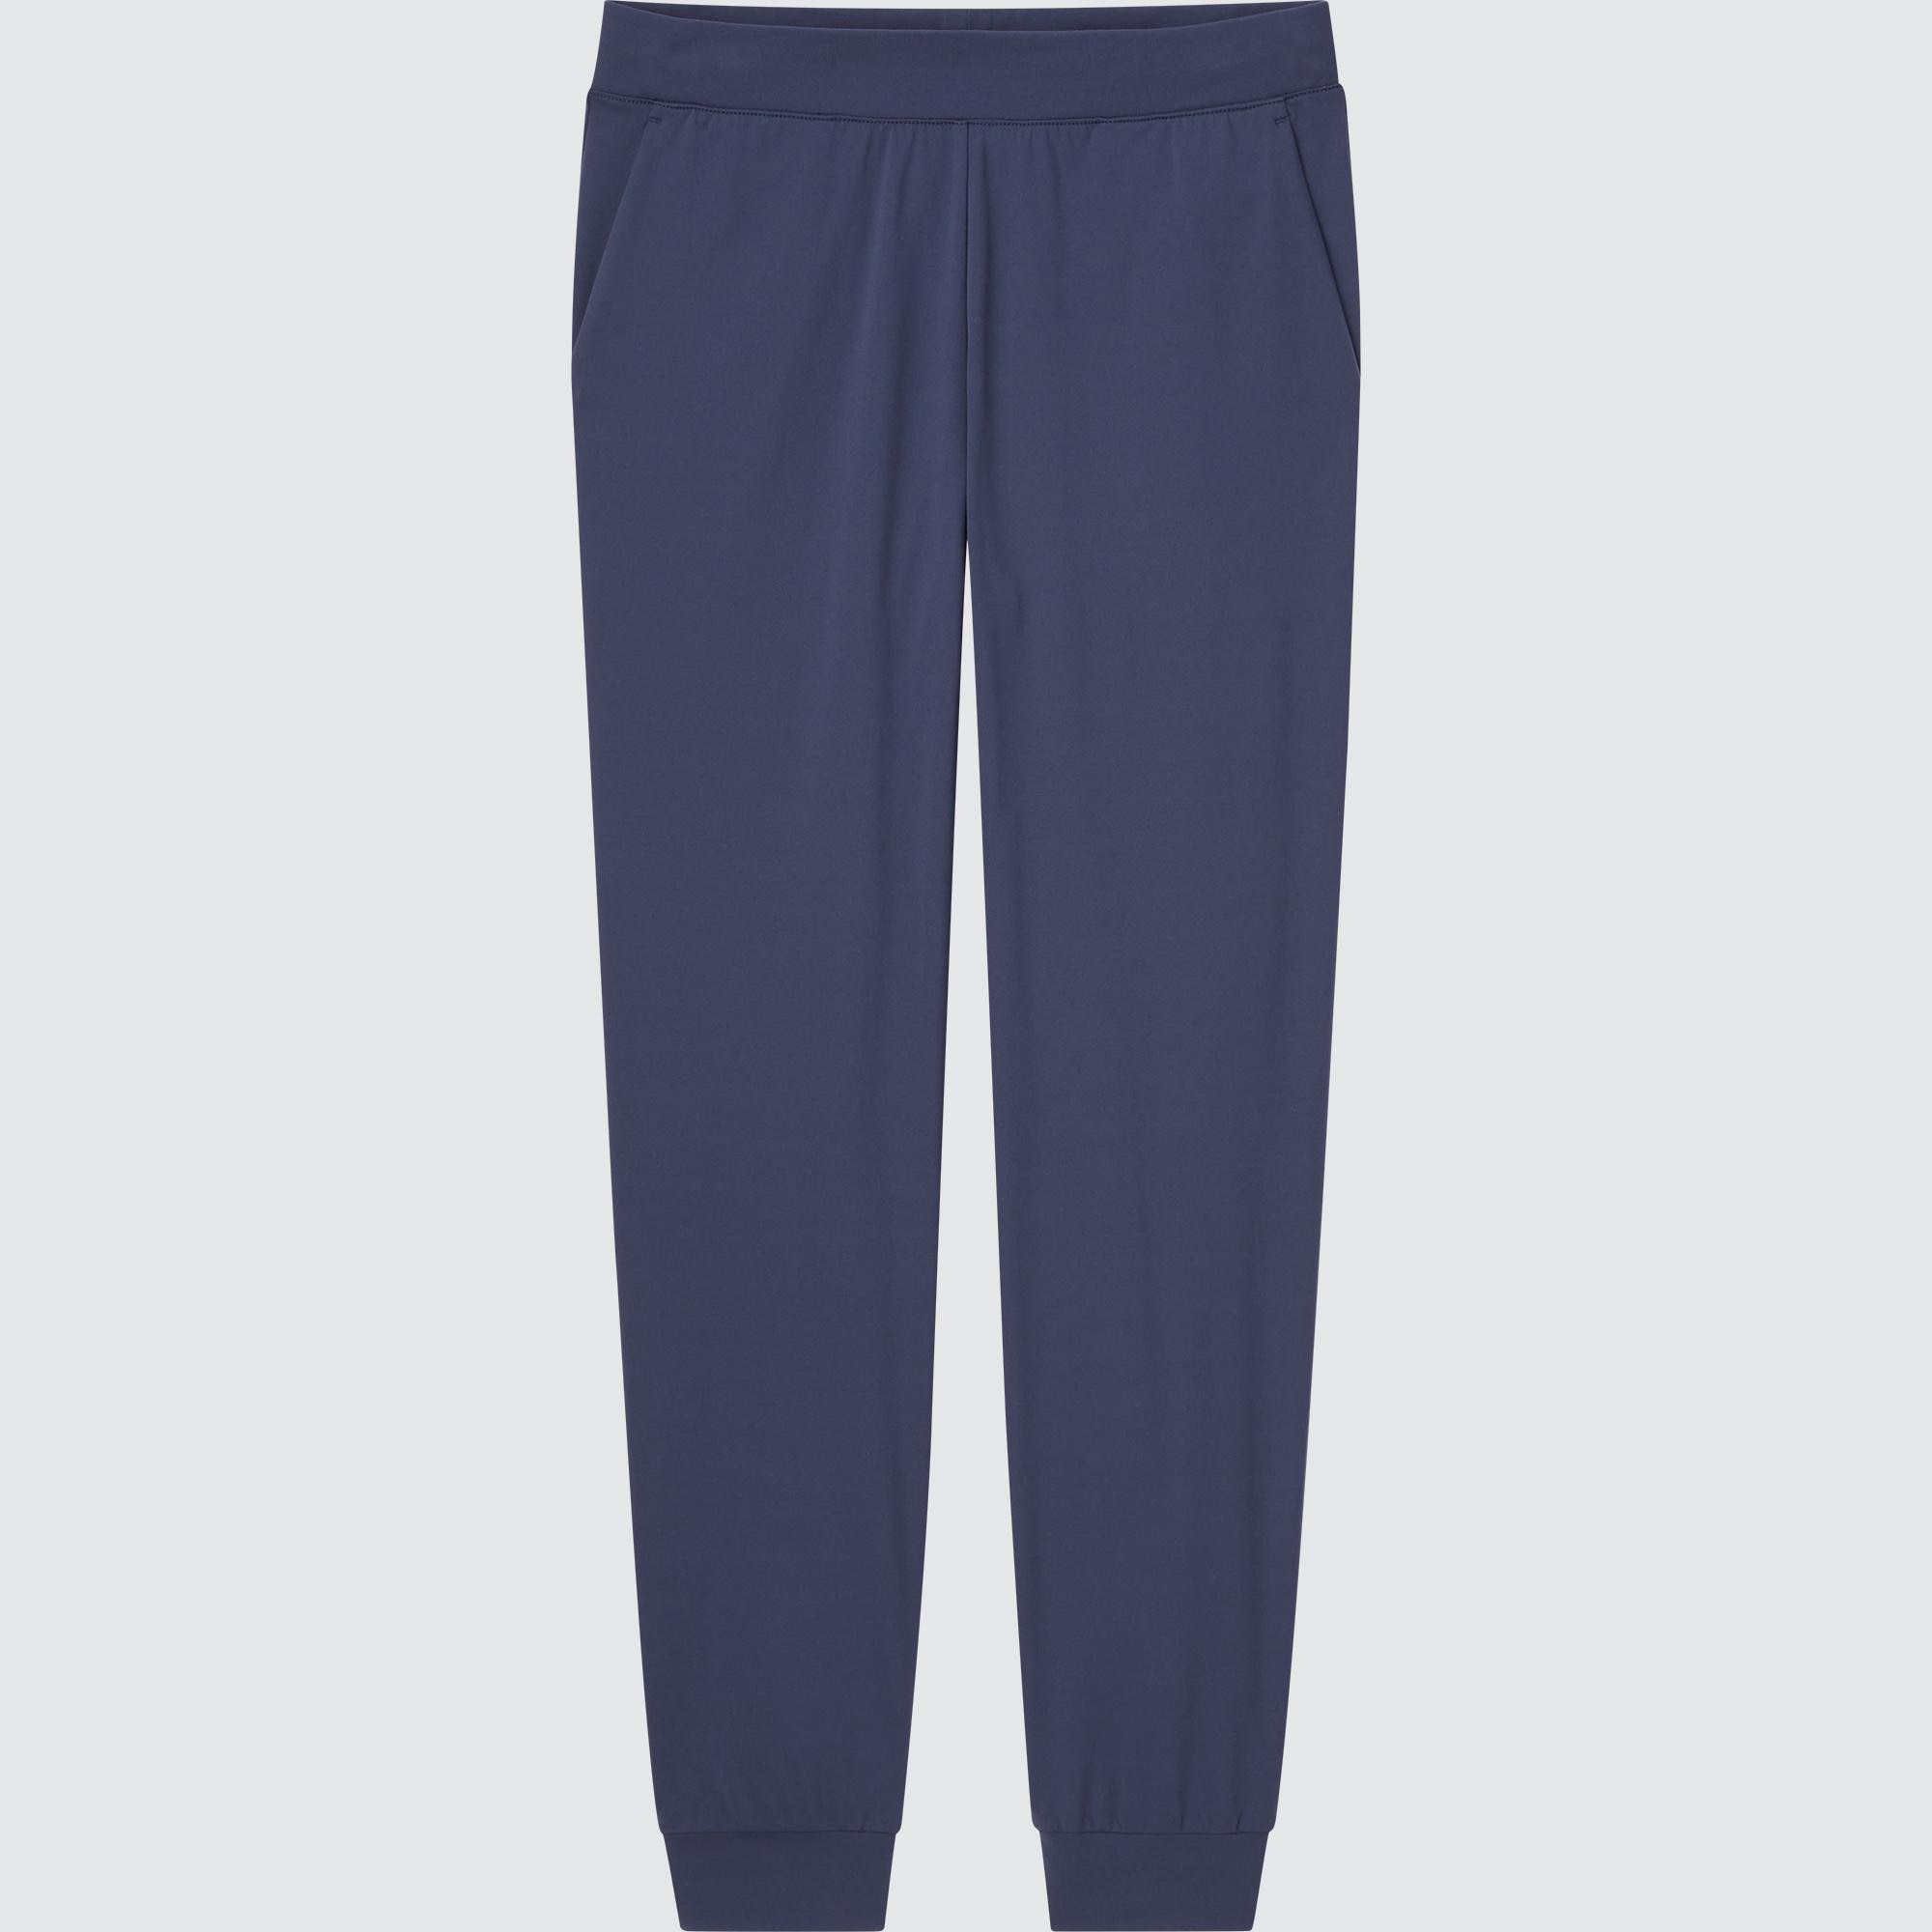 Uniqlo Singapore - Ultra Stretch Dry Sweat Hoodie ($49.90) Ultra Stretch  Active Jogger Pants ($29.90)